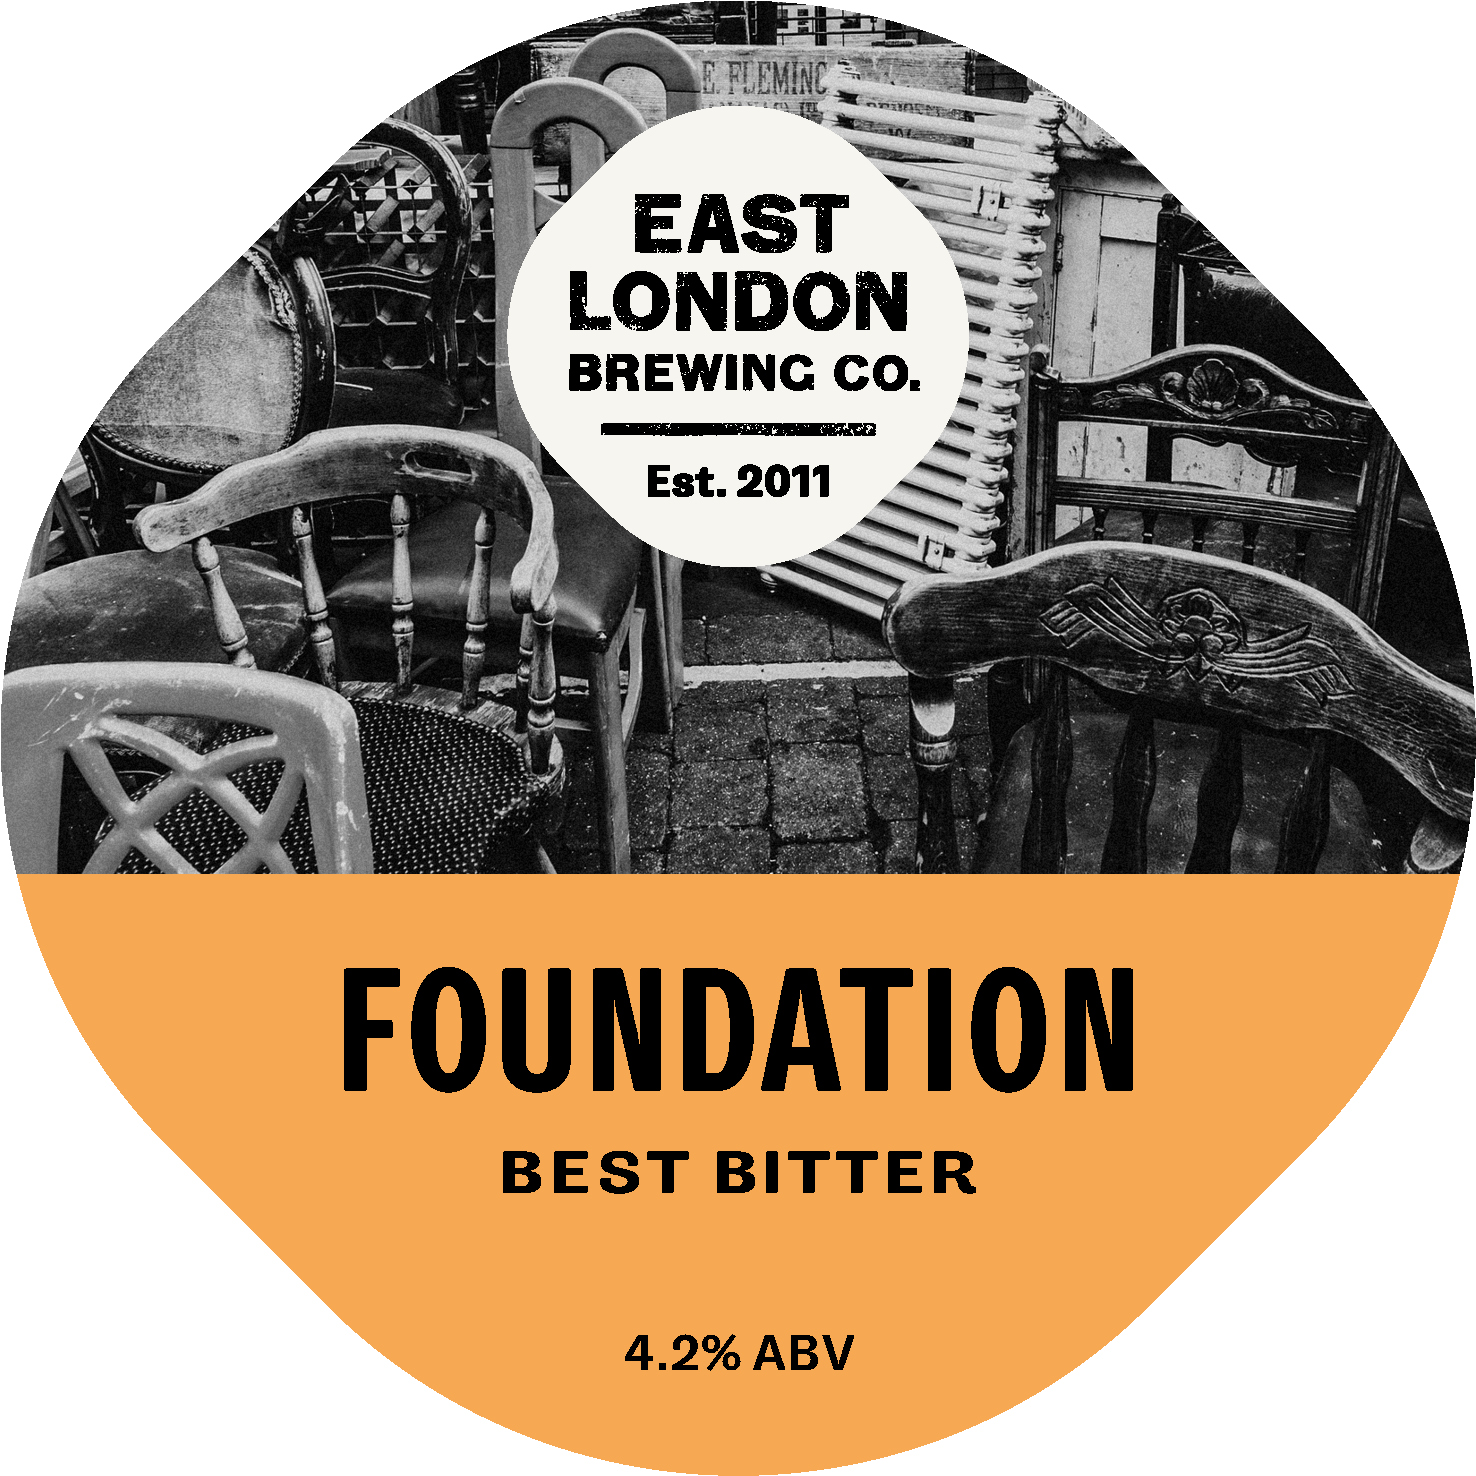 East London Brewing Co. Foundation